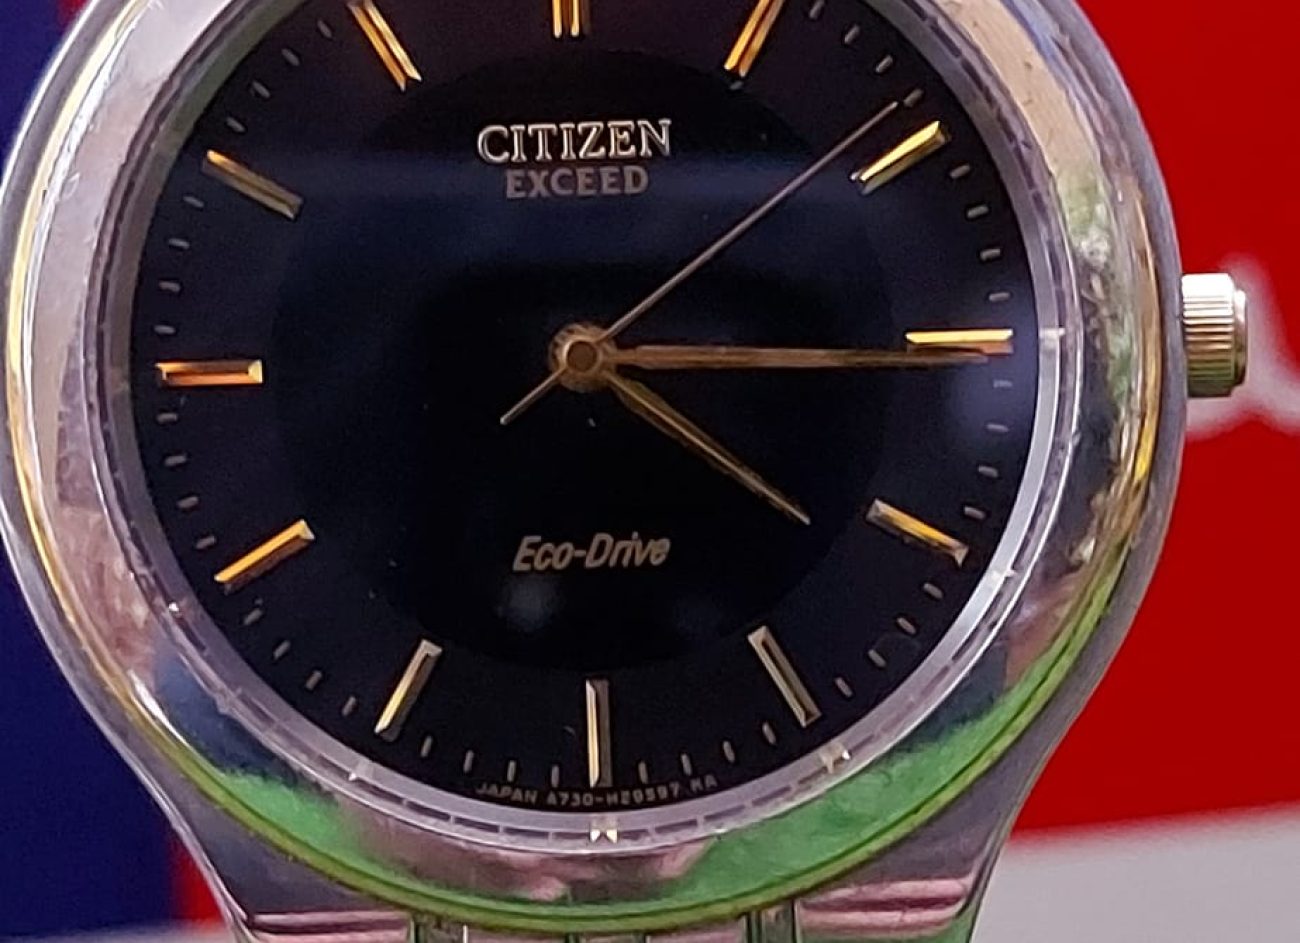 Citizen Exceed Eco-Drive Men’s Watch A730-H09467 TA